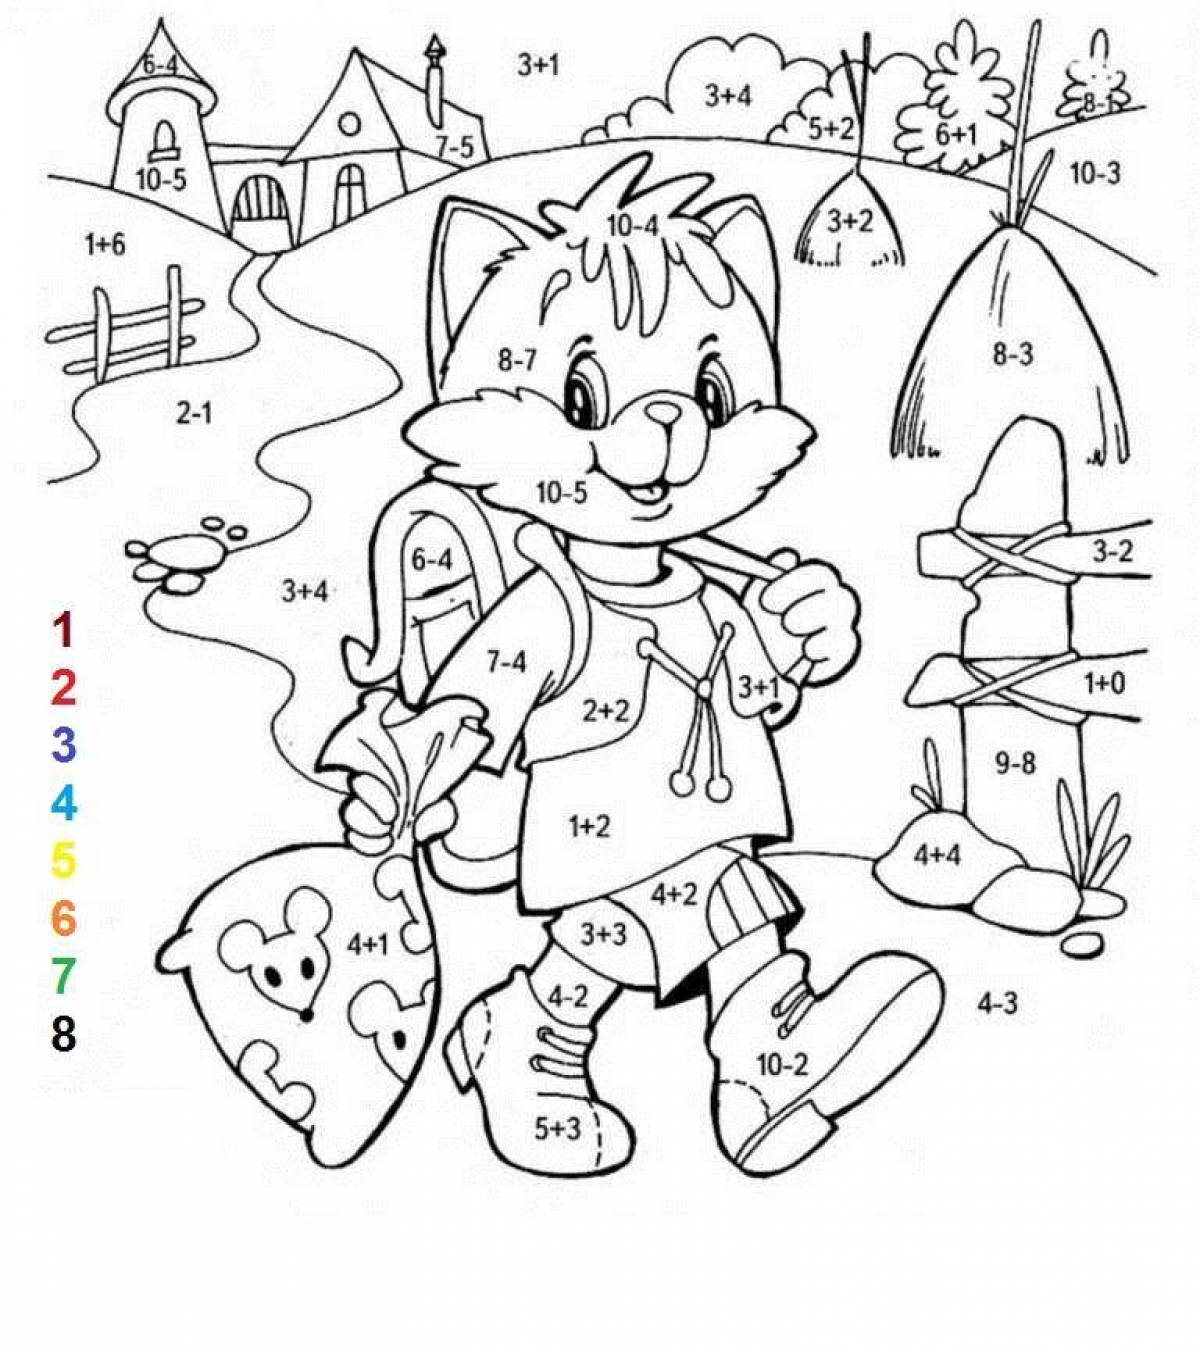 Colorful math coloring book for grade 1 with examples up to 10